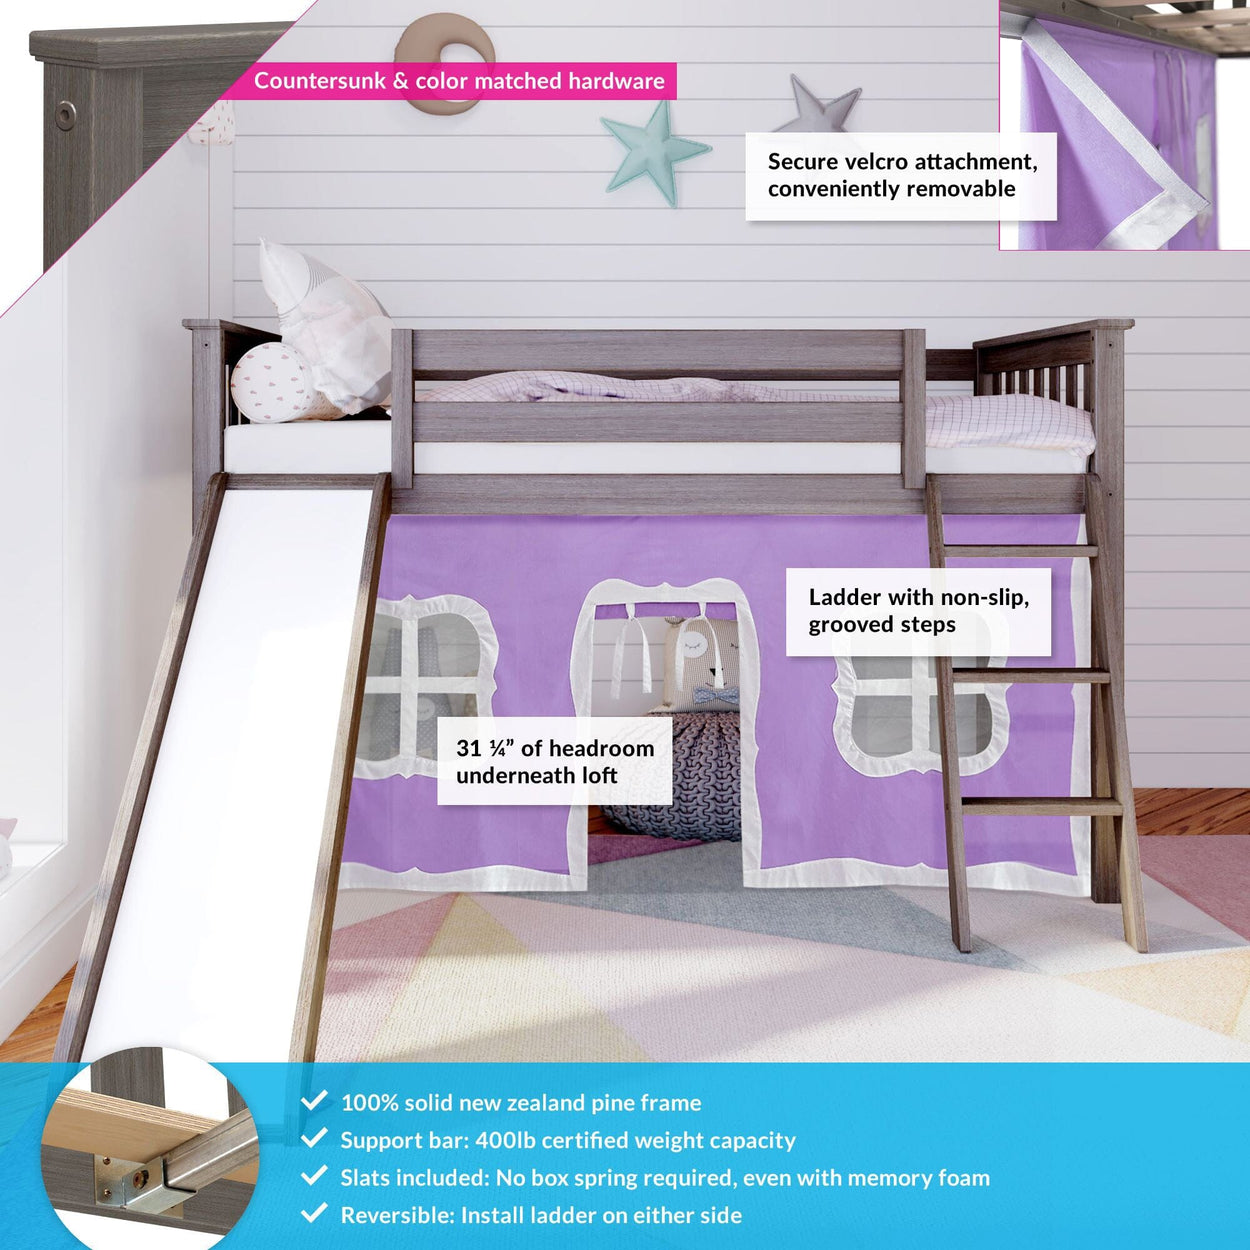 180213151061 : Loft Beds Twin-Size Low Loft with Slide with Curtain, Clay + Purple Curtain